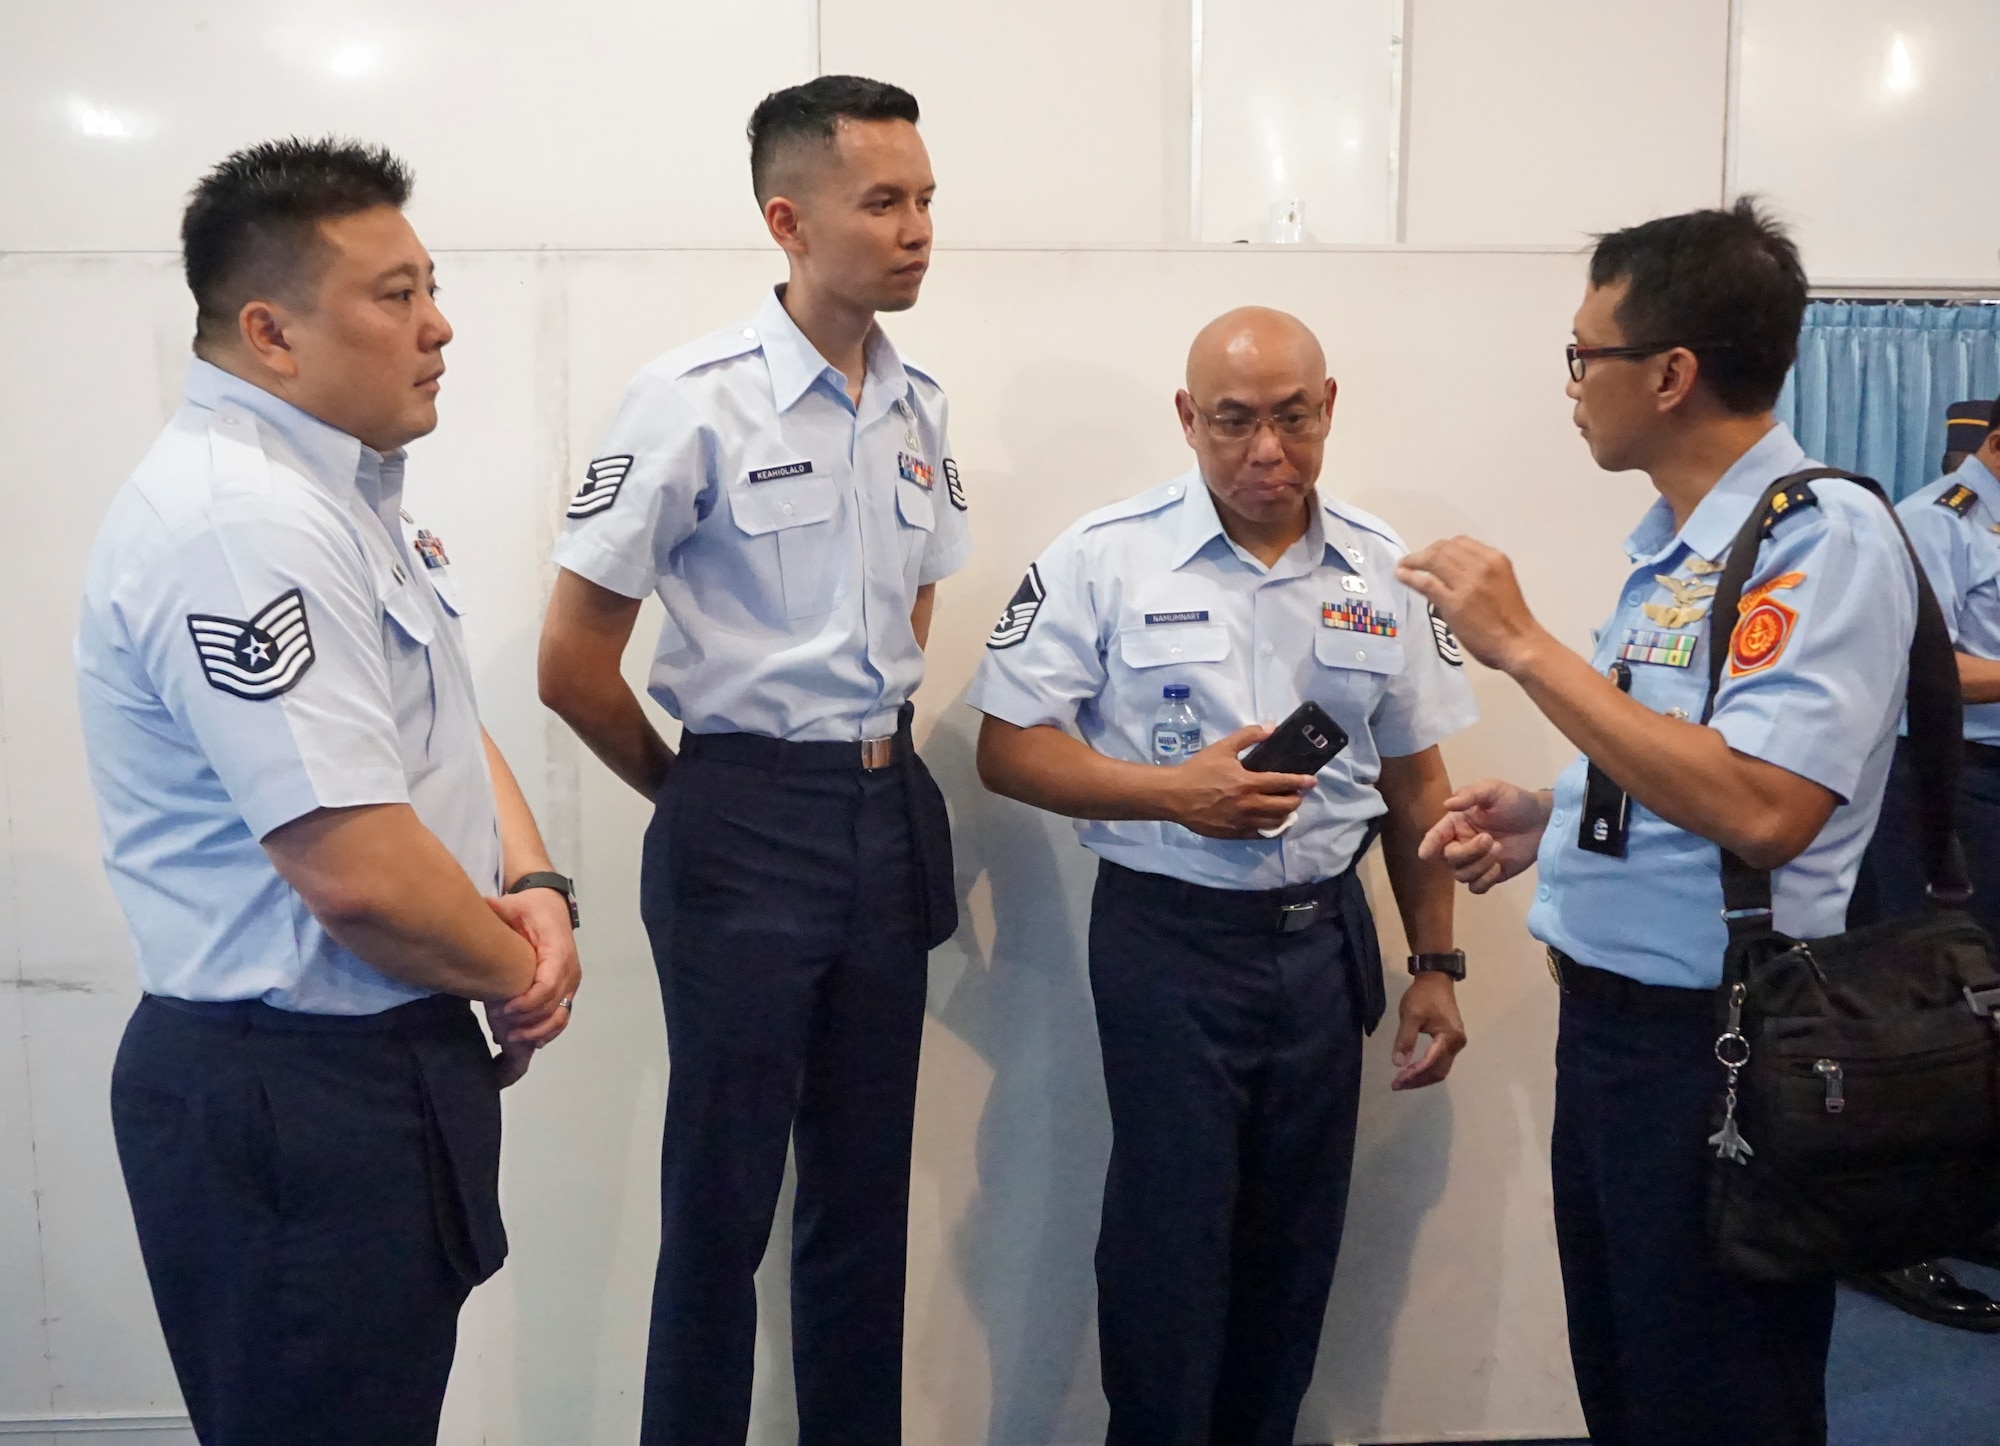 Hawaii Air National Guard (HIANG) members from the 169th Air Defense Squadron (ADS) talk with a member of the Indonesian Air Force (TNI) Jul. 10, 2019 in Yogyakarta, Indonesia.